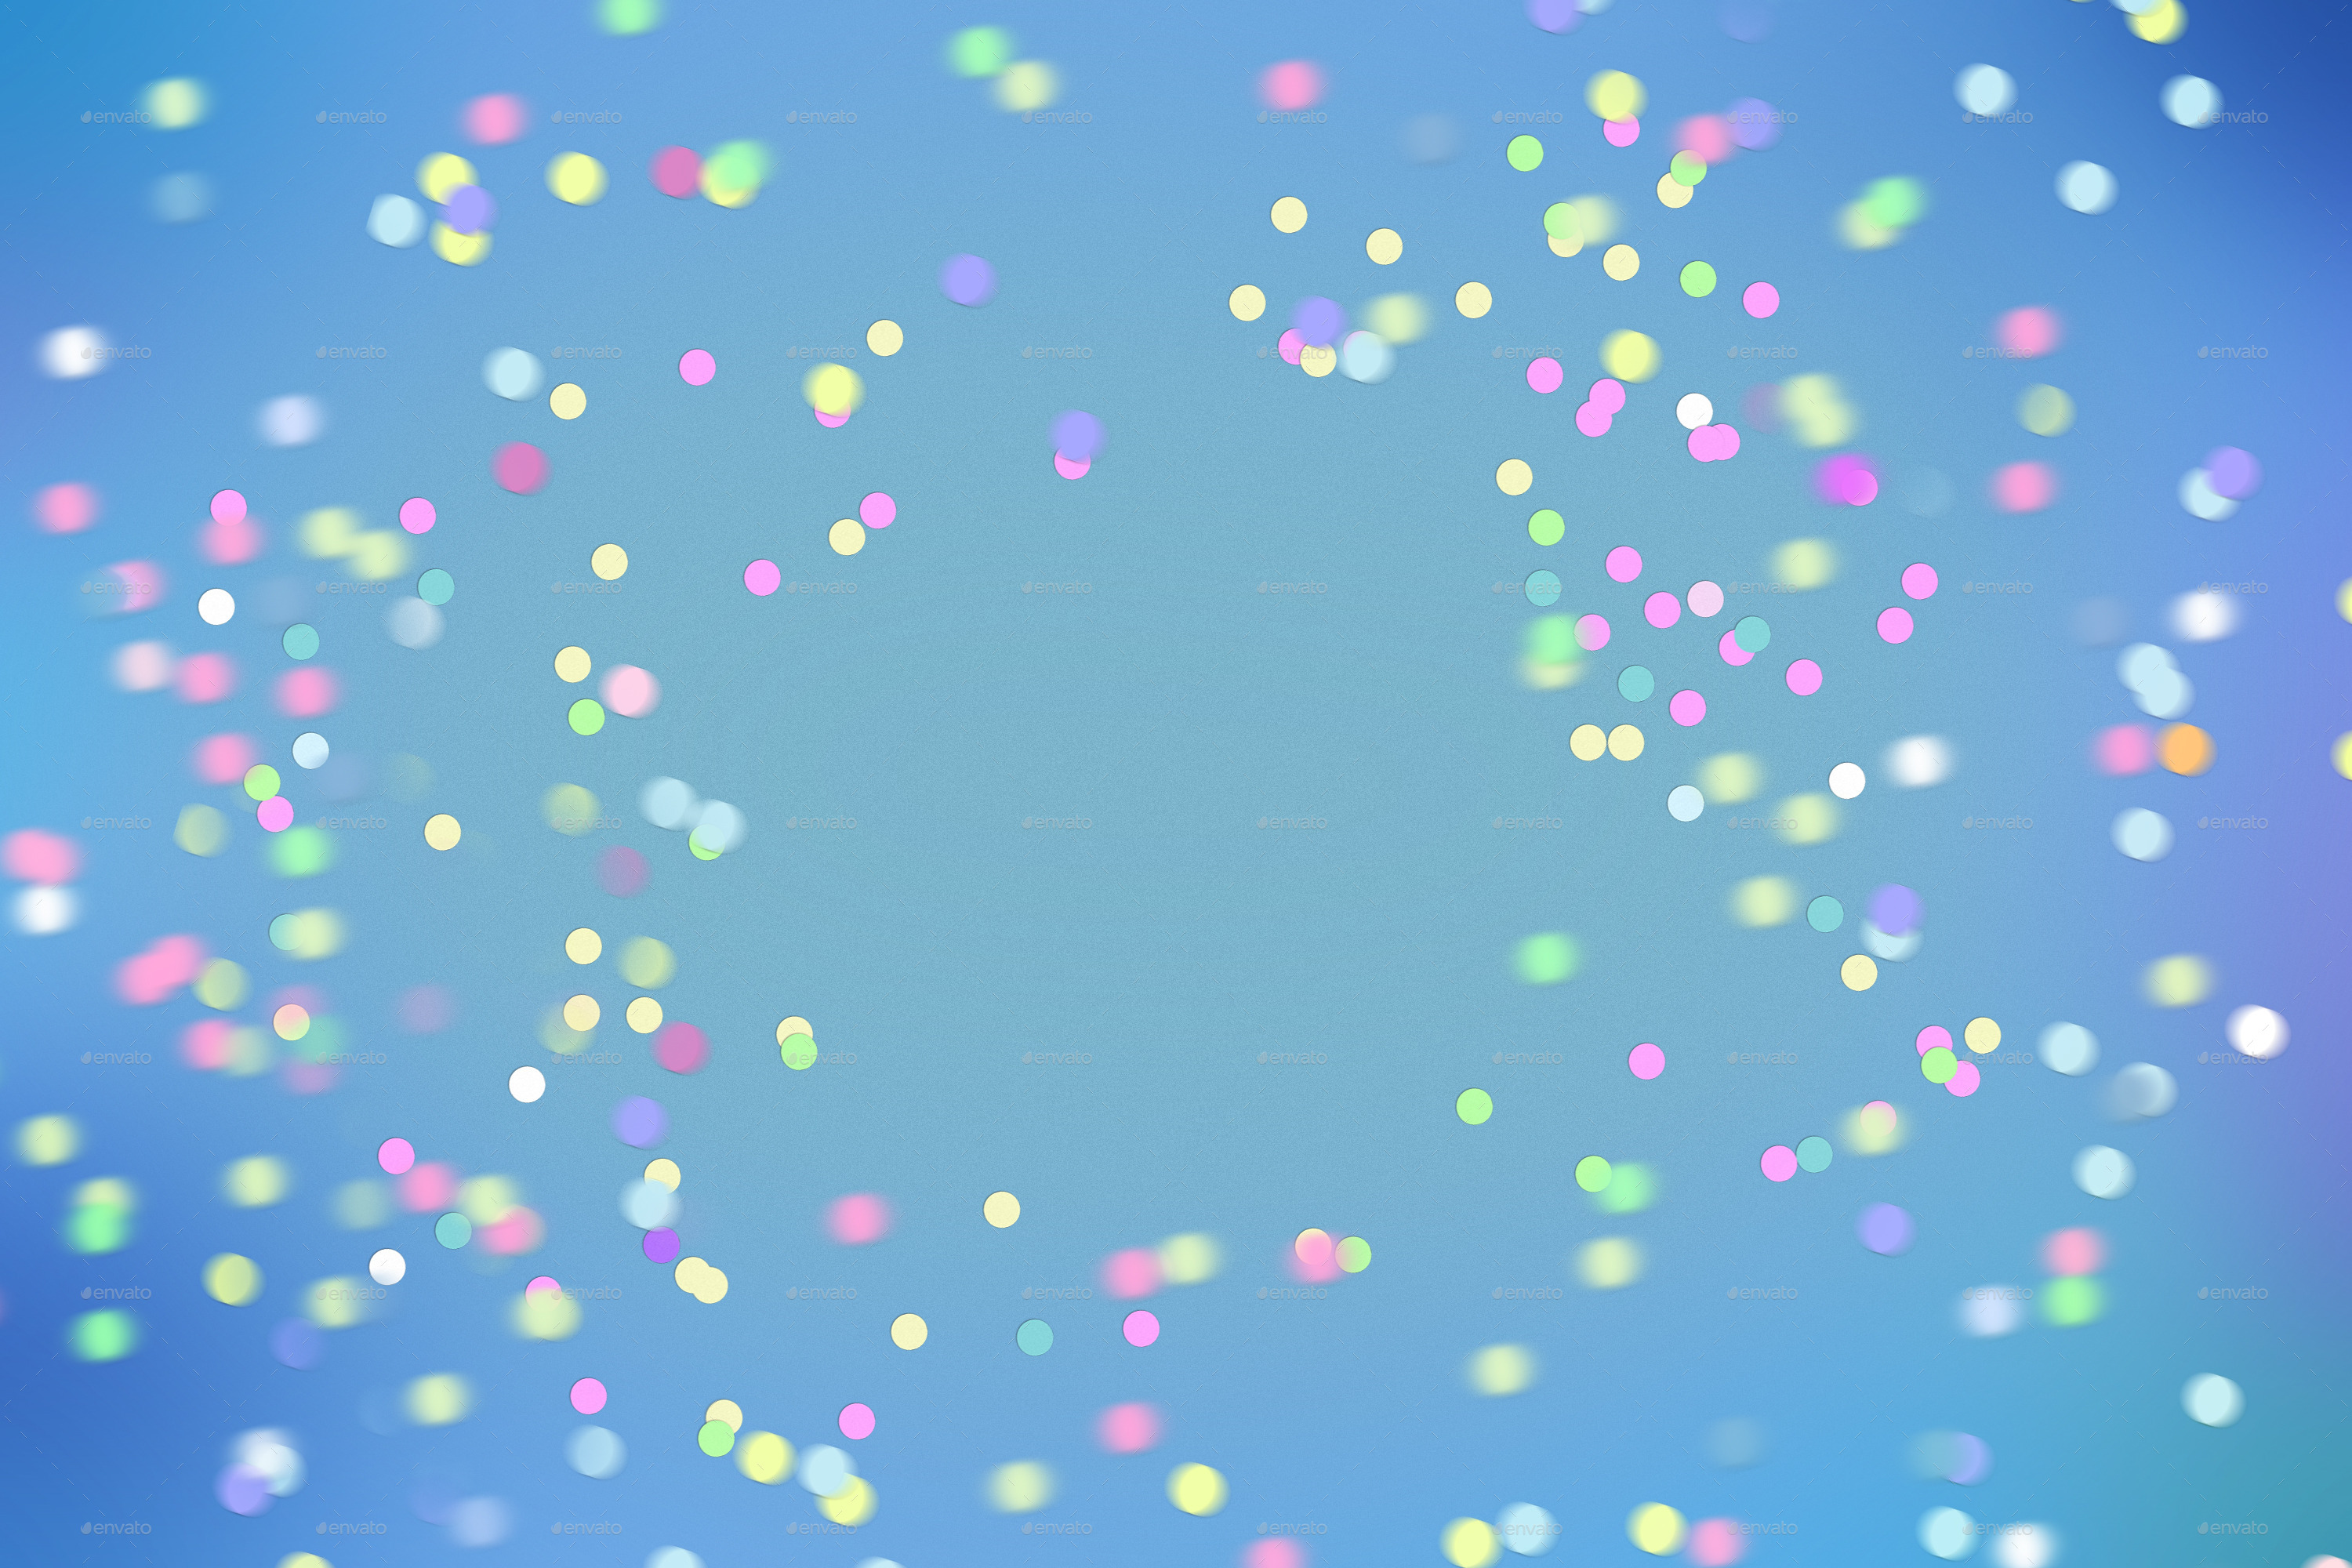 15 Confetti Backgrounds By Mapictures Graphicriver HD Wallpapers Download Free Map Images Wallpaper [wallpaper376.blogspot.com]